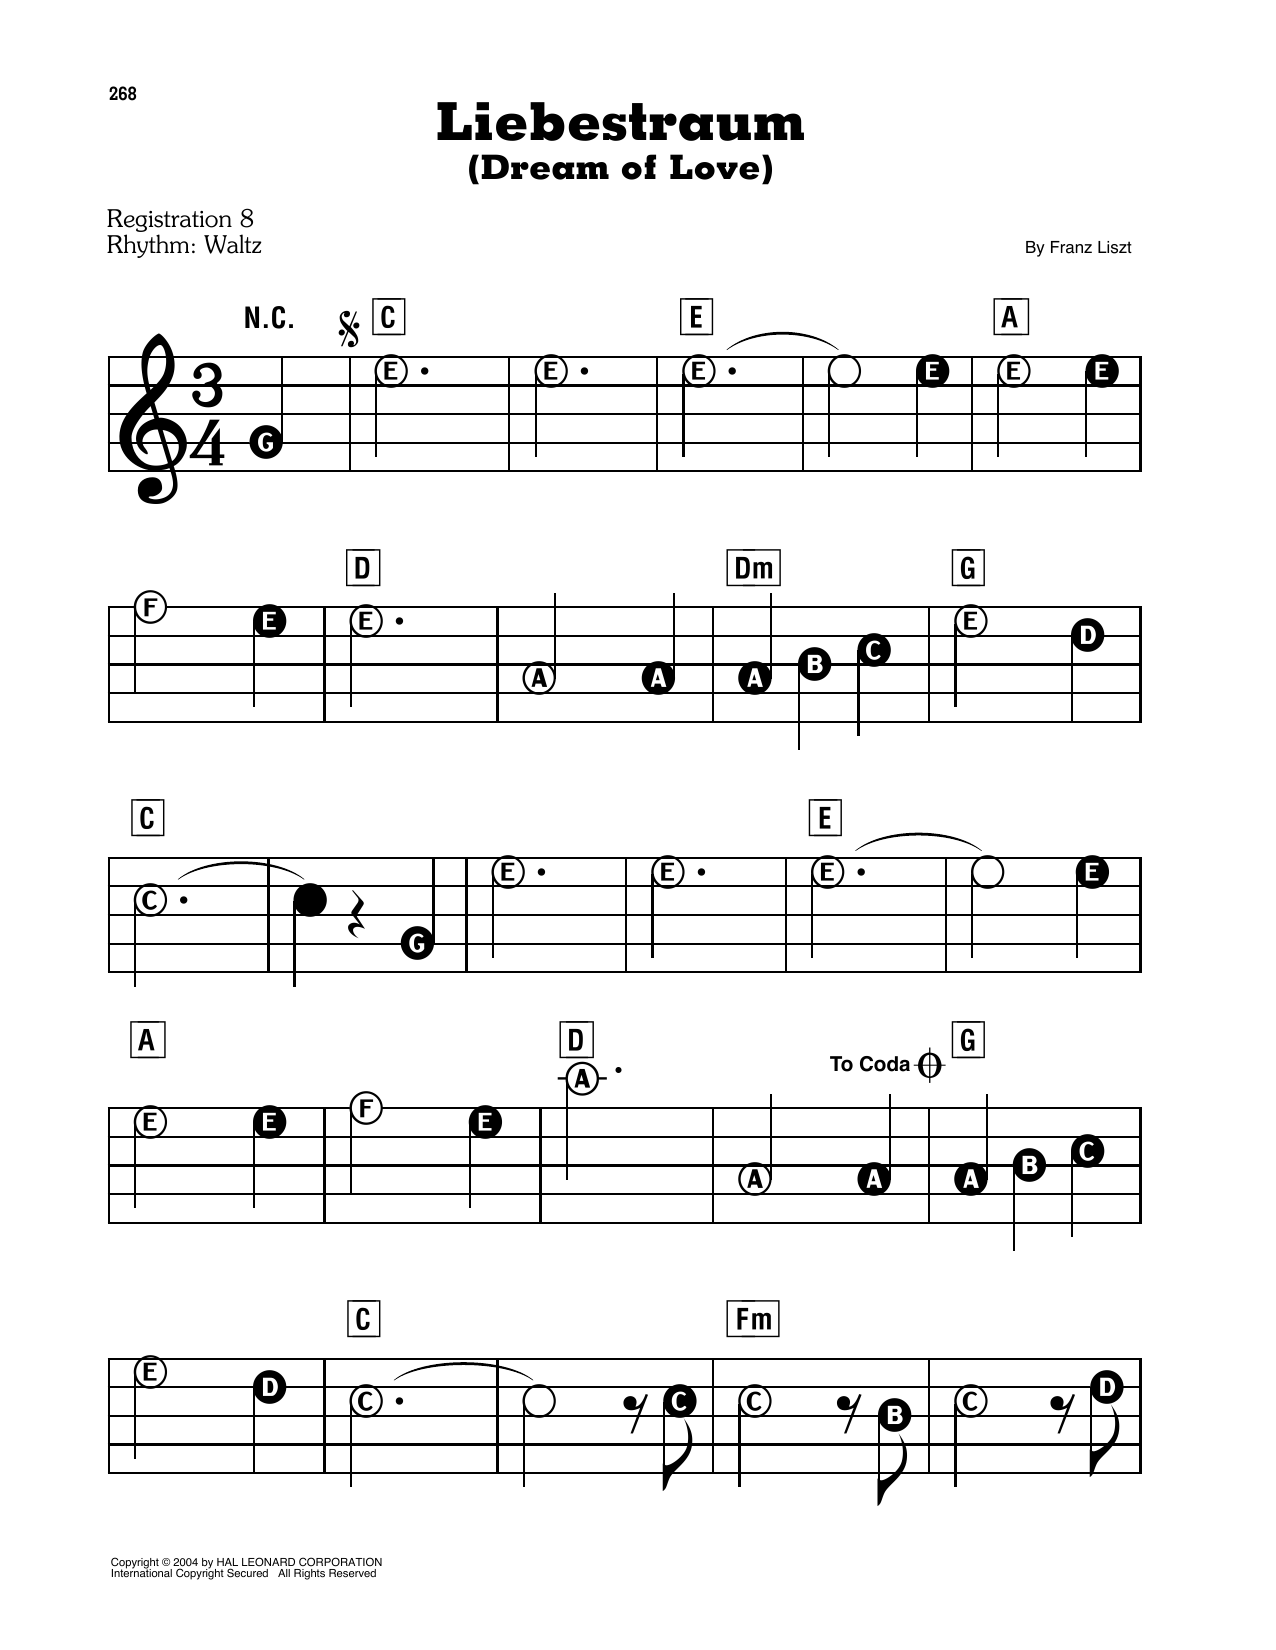 Dairy products Belly beautiful Franz Liszt "Liebestraum No. 3 (Dream Of Love)" Sheet Music | Download  Printable Classical PDF Score | How To Play On Piano Solo? SKU 444340